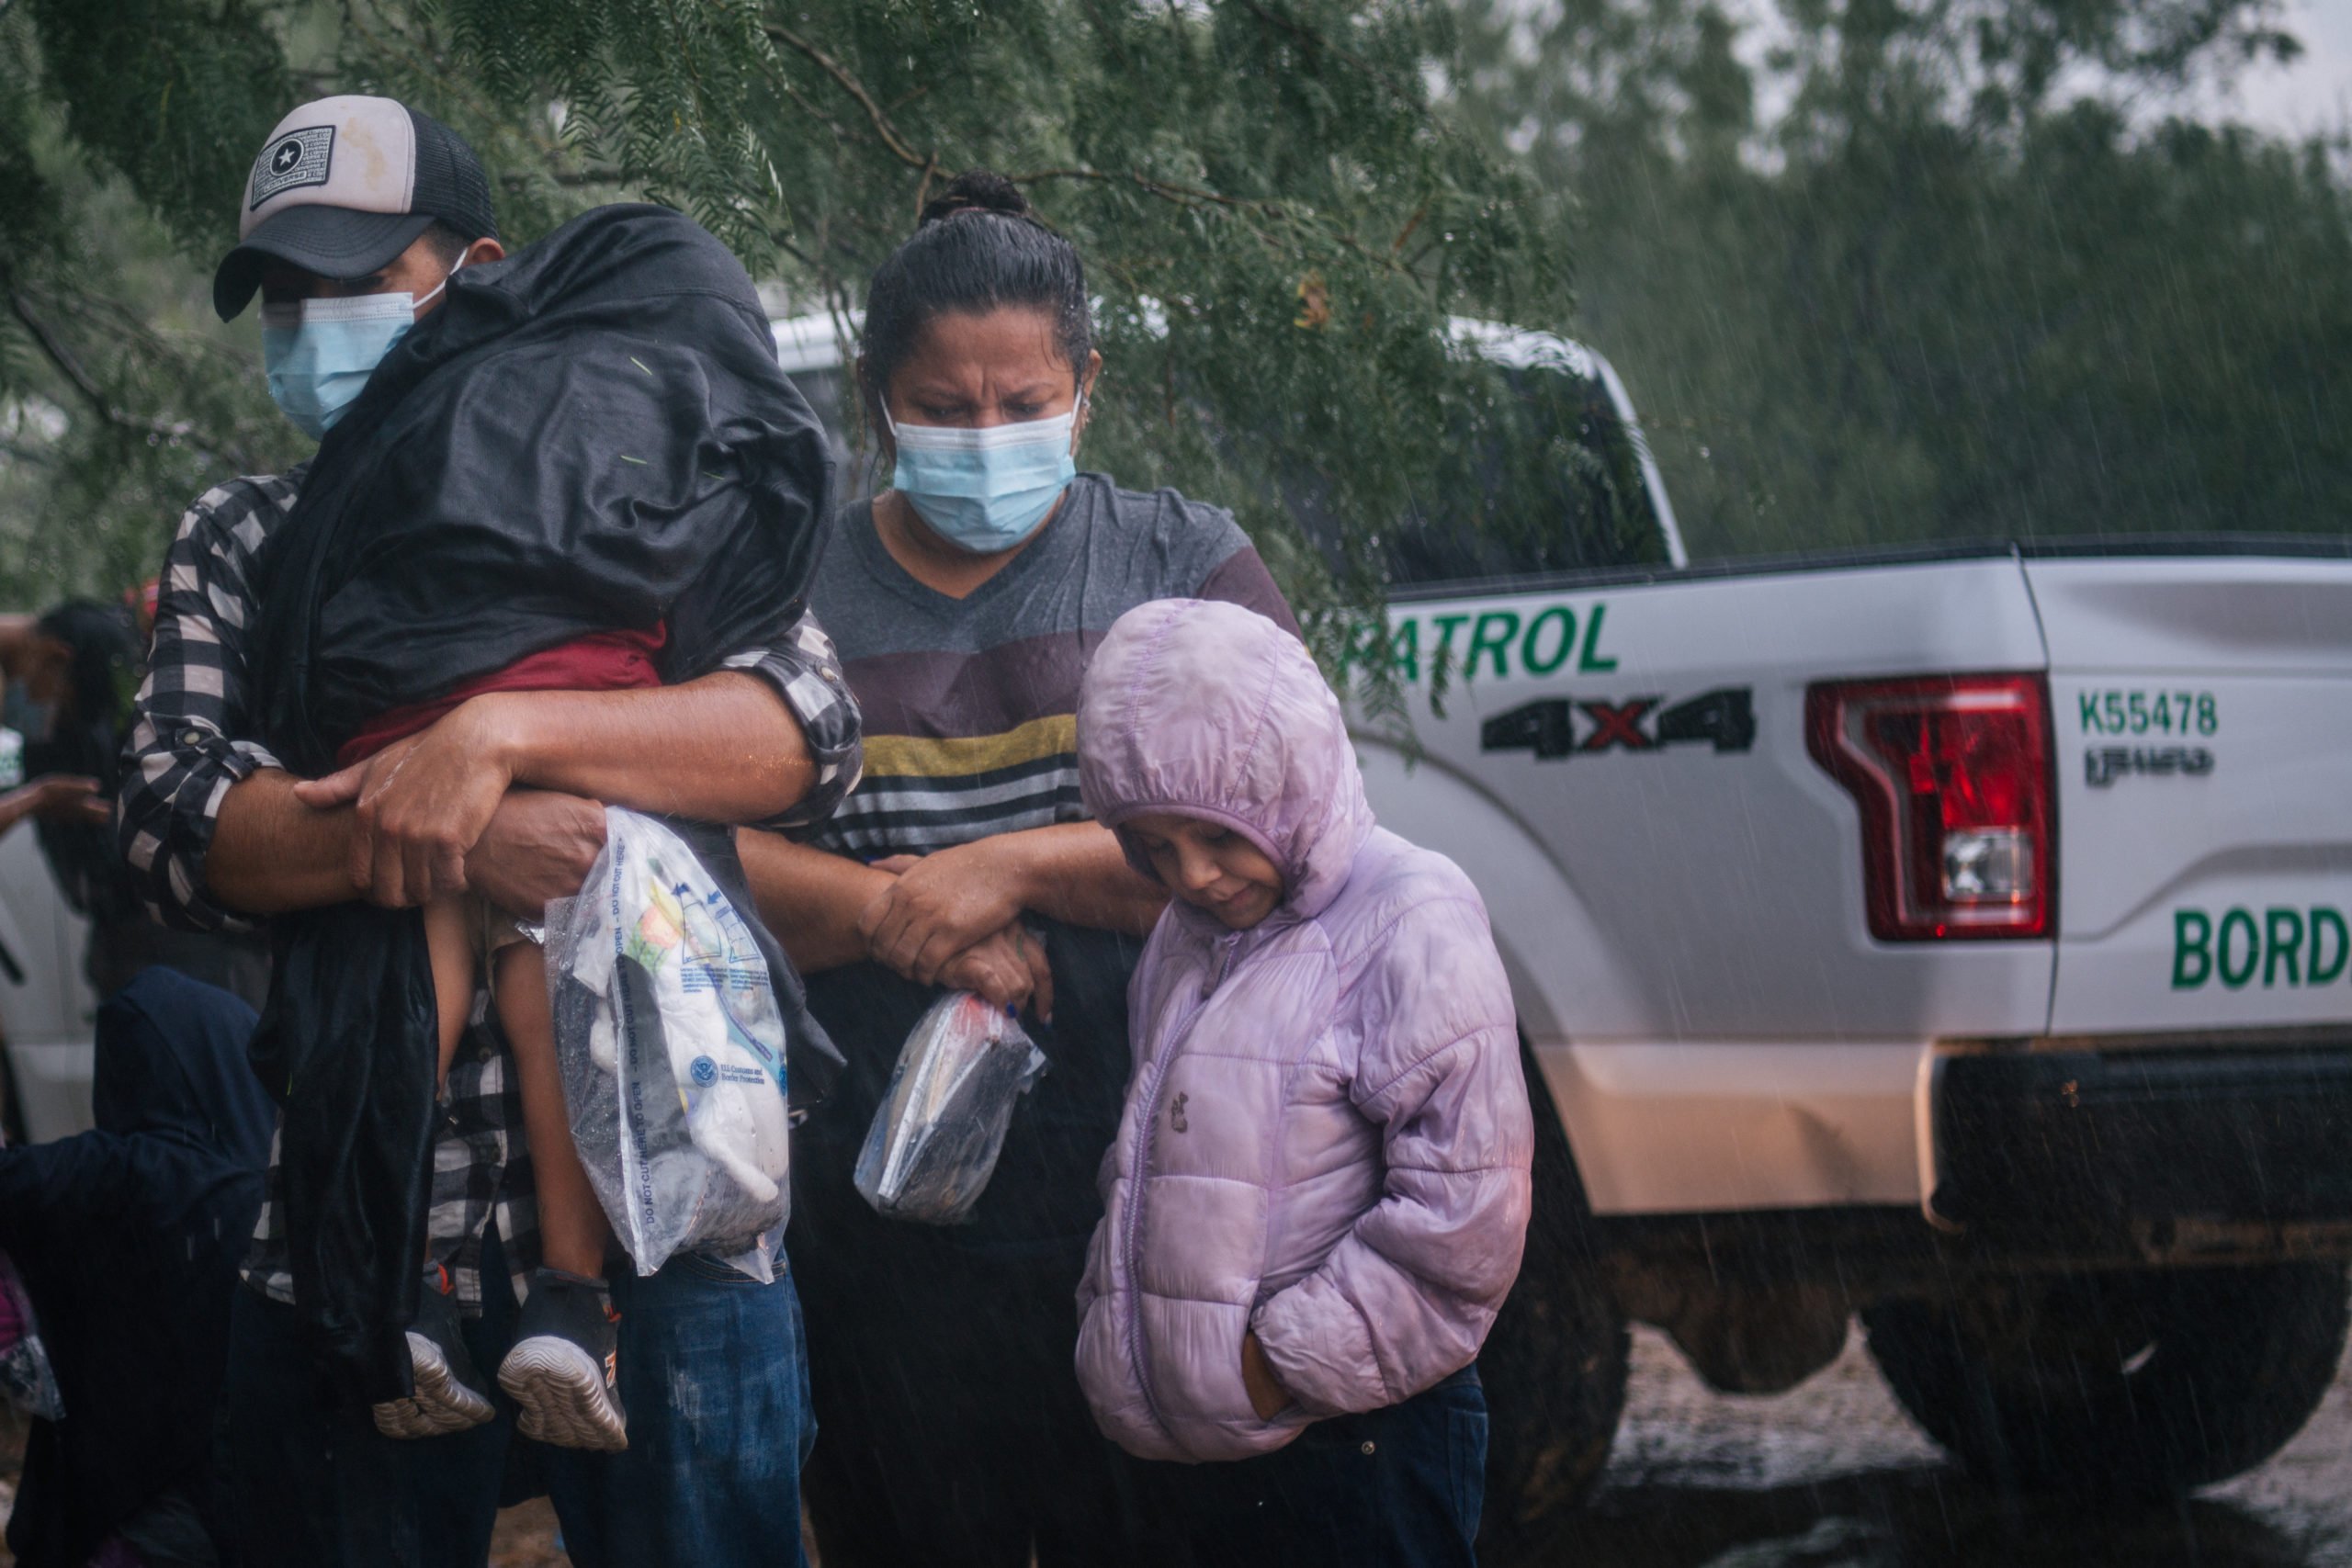 An immigrants family seeking asylum prepares to be taken to a border patrol processing facility after crossing into the U.S. on June 16, 2021 in LaJoya, Texas. (Photo by Brandon Bell/Getty Images)